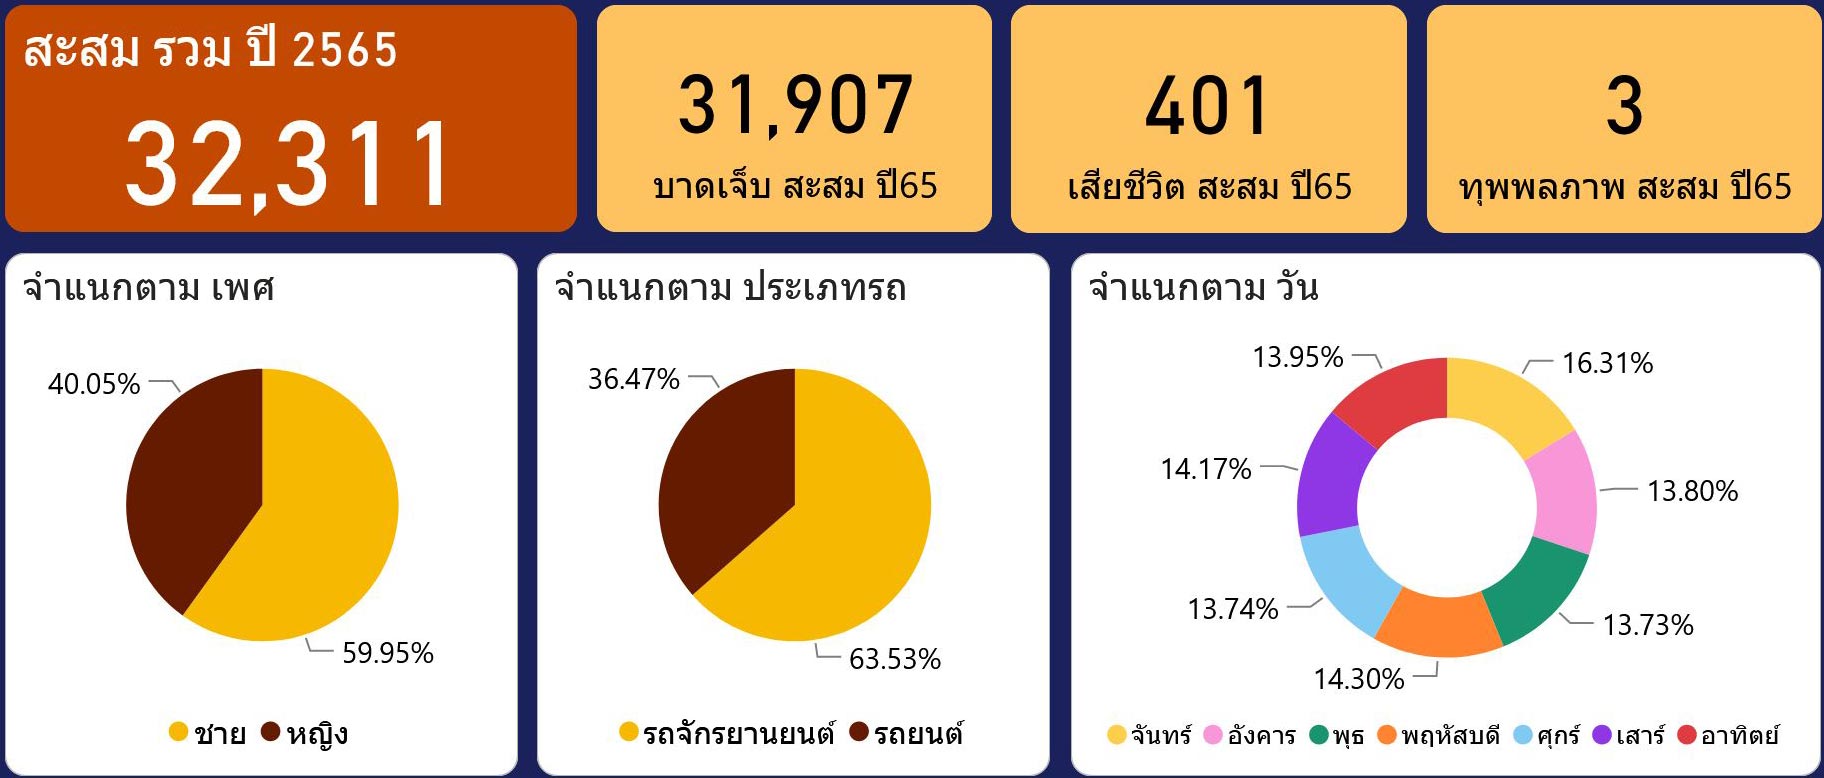 Chiang Mai Road Accident Data